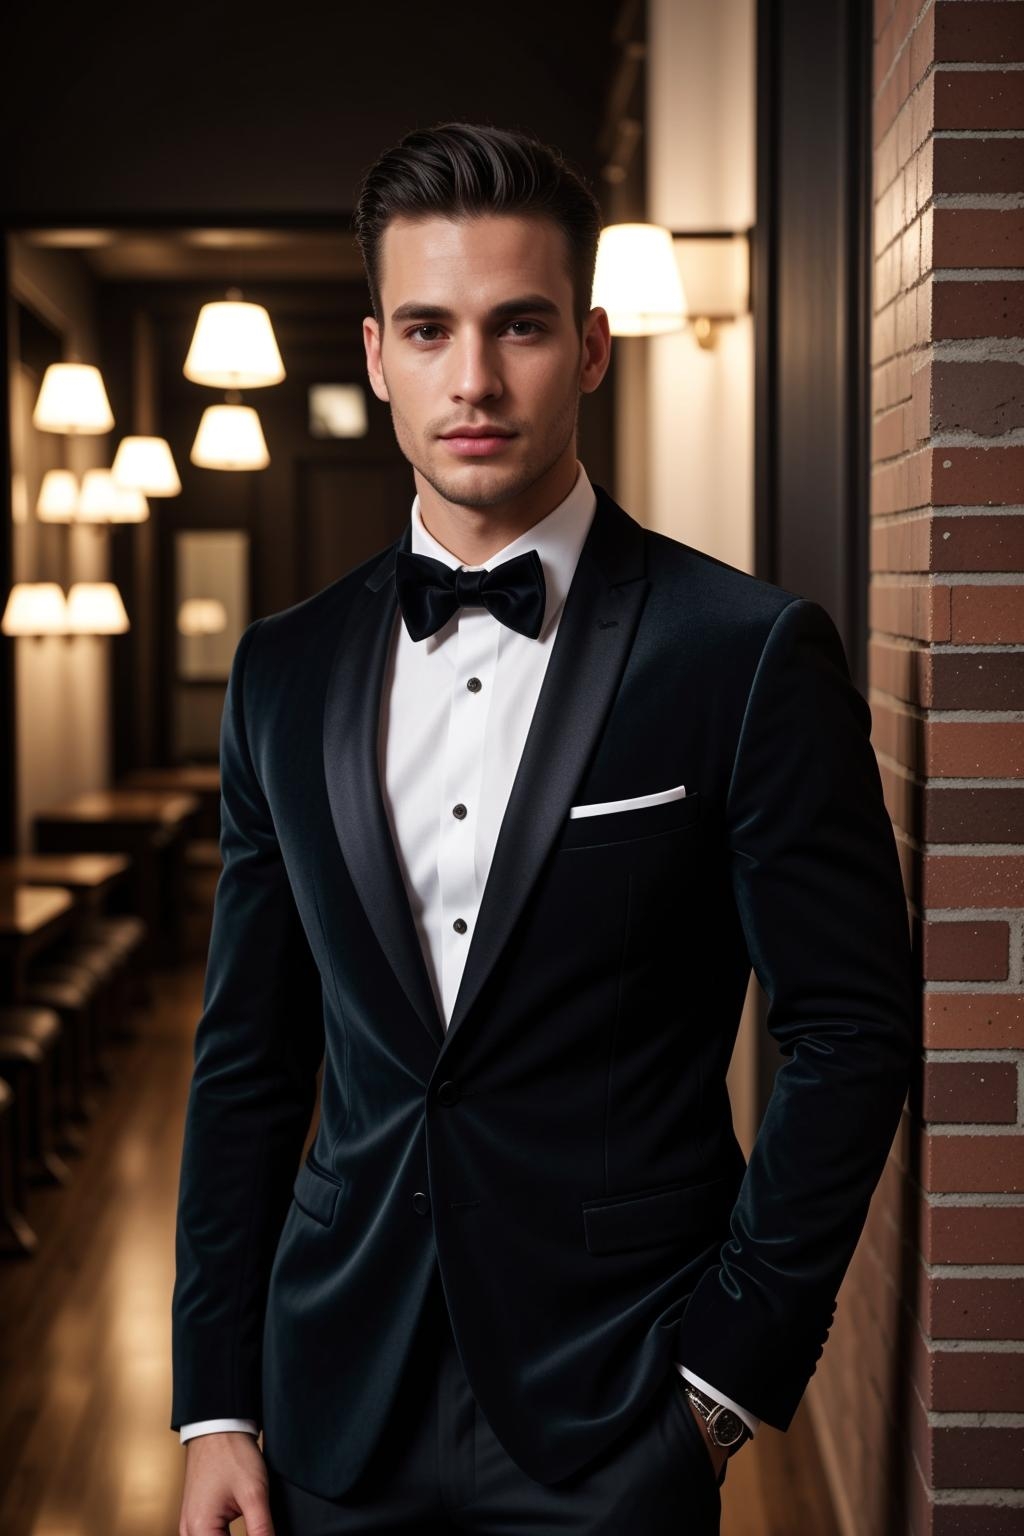 A handsome man in a tailored black tuxedo, velvet lapels, slim fit, classic silhouette, crisp white dress shirt, black bow tie, polished leather shoes, dimly lit speakeasy ambiance, solid color background, high fashion ad campaign